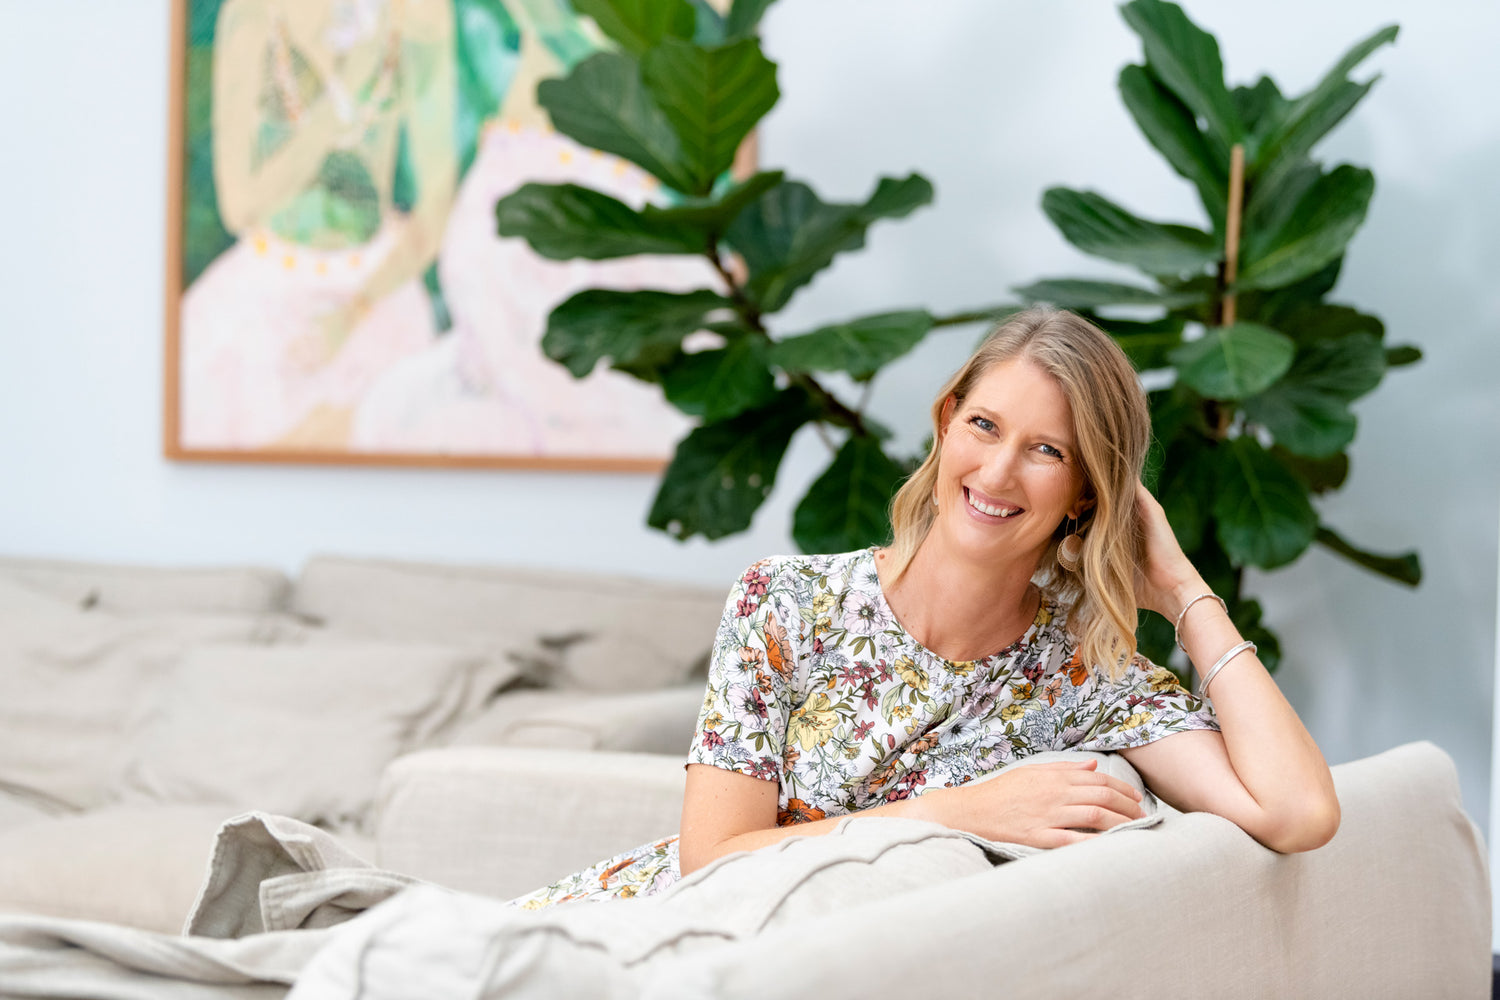 Anna, founder of Lighthouse Lane relaxing on a plush natural sofa wearing a floral dress. There is calming artwork and a fiddle leaf fig in the background.